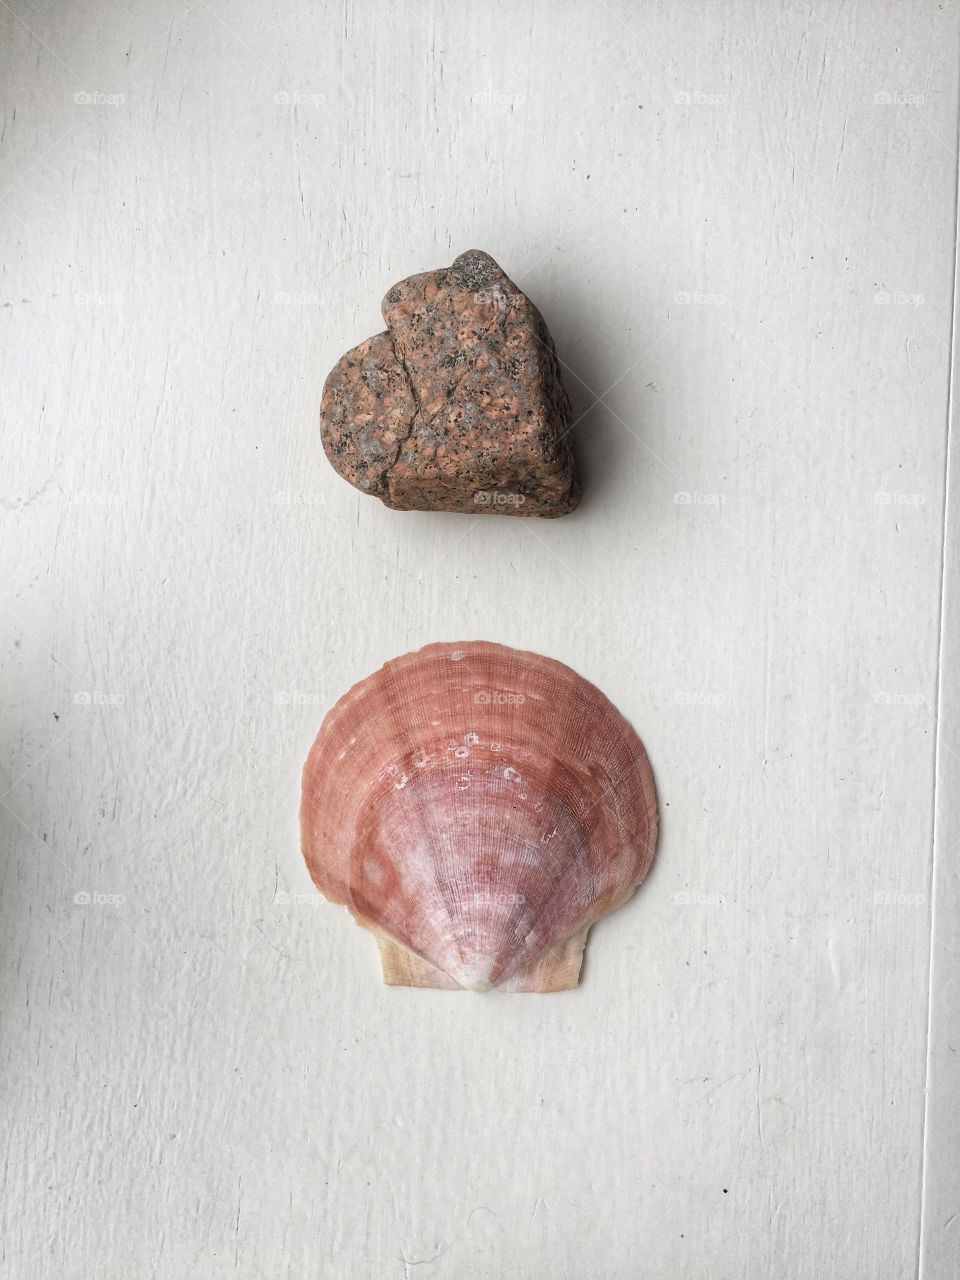 A shell and a rock sit side by side on a wooden tabletop that has been painted white. The shell is pink and the rock is of many colors and textures.